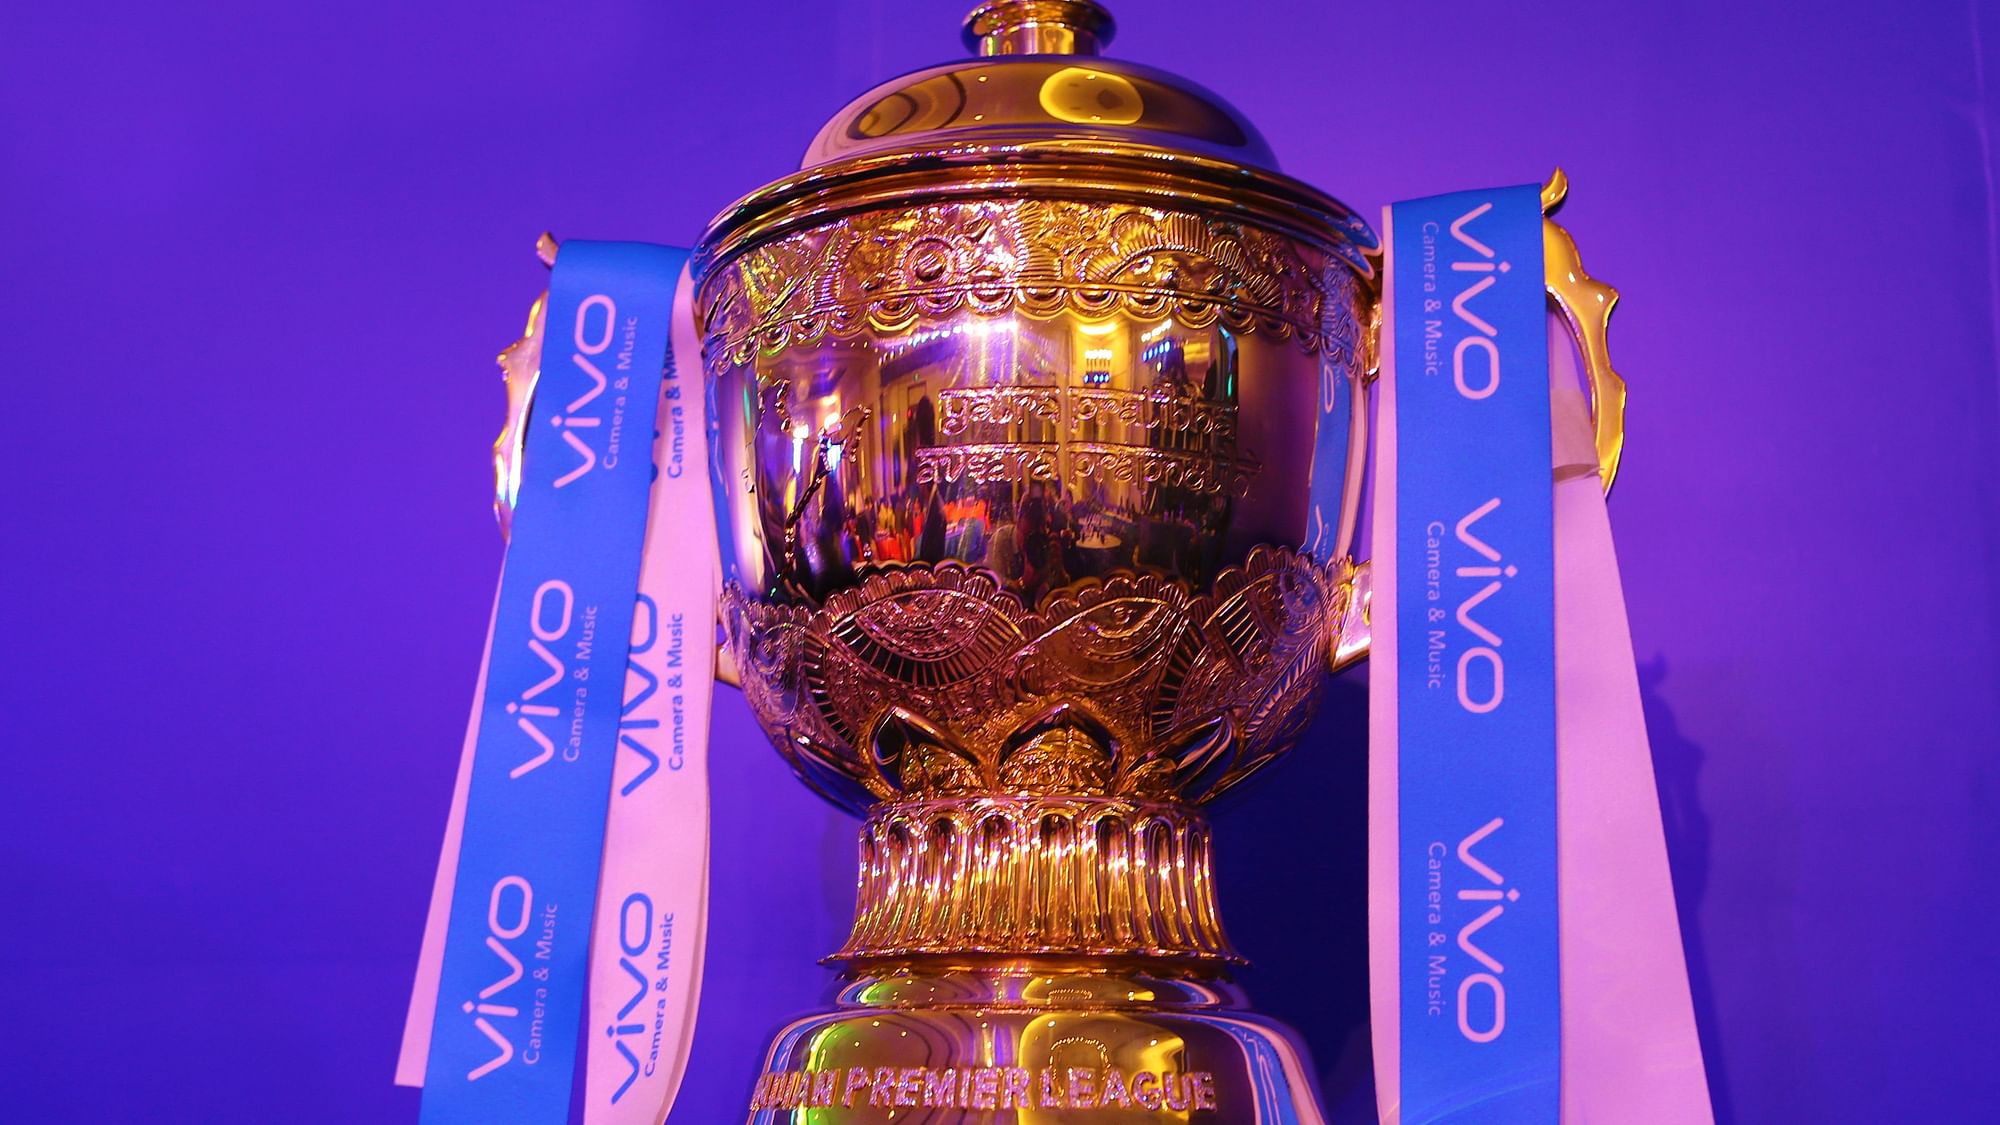 According to media reports, IPL 2021 has been suspended due to new COVID cases within teams.